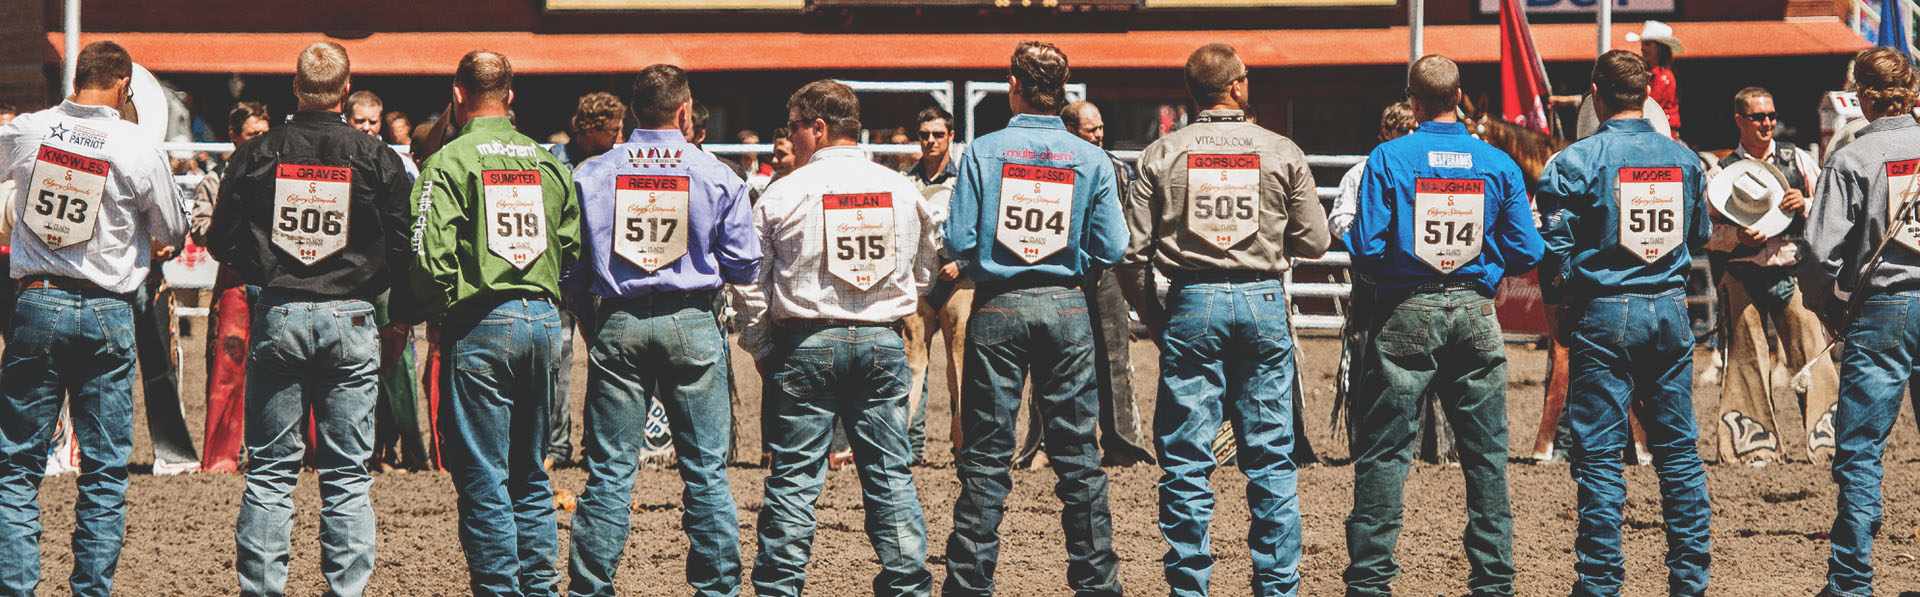 Cowboys lined up at the Calgary Stampede